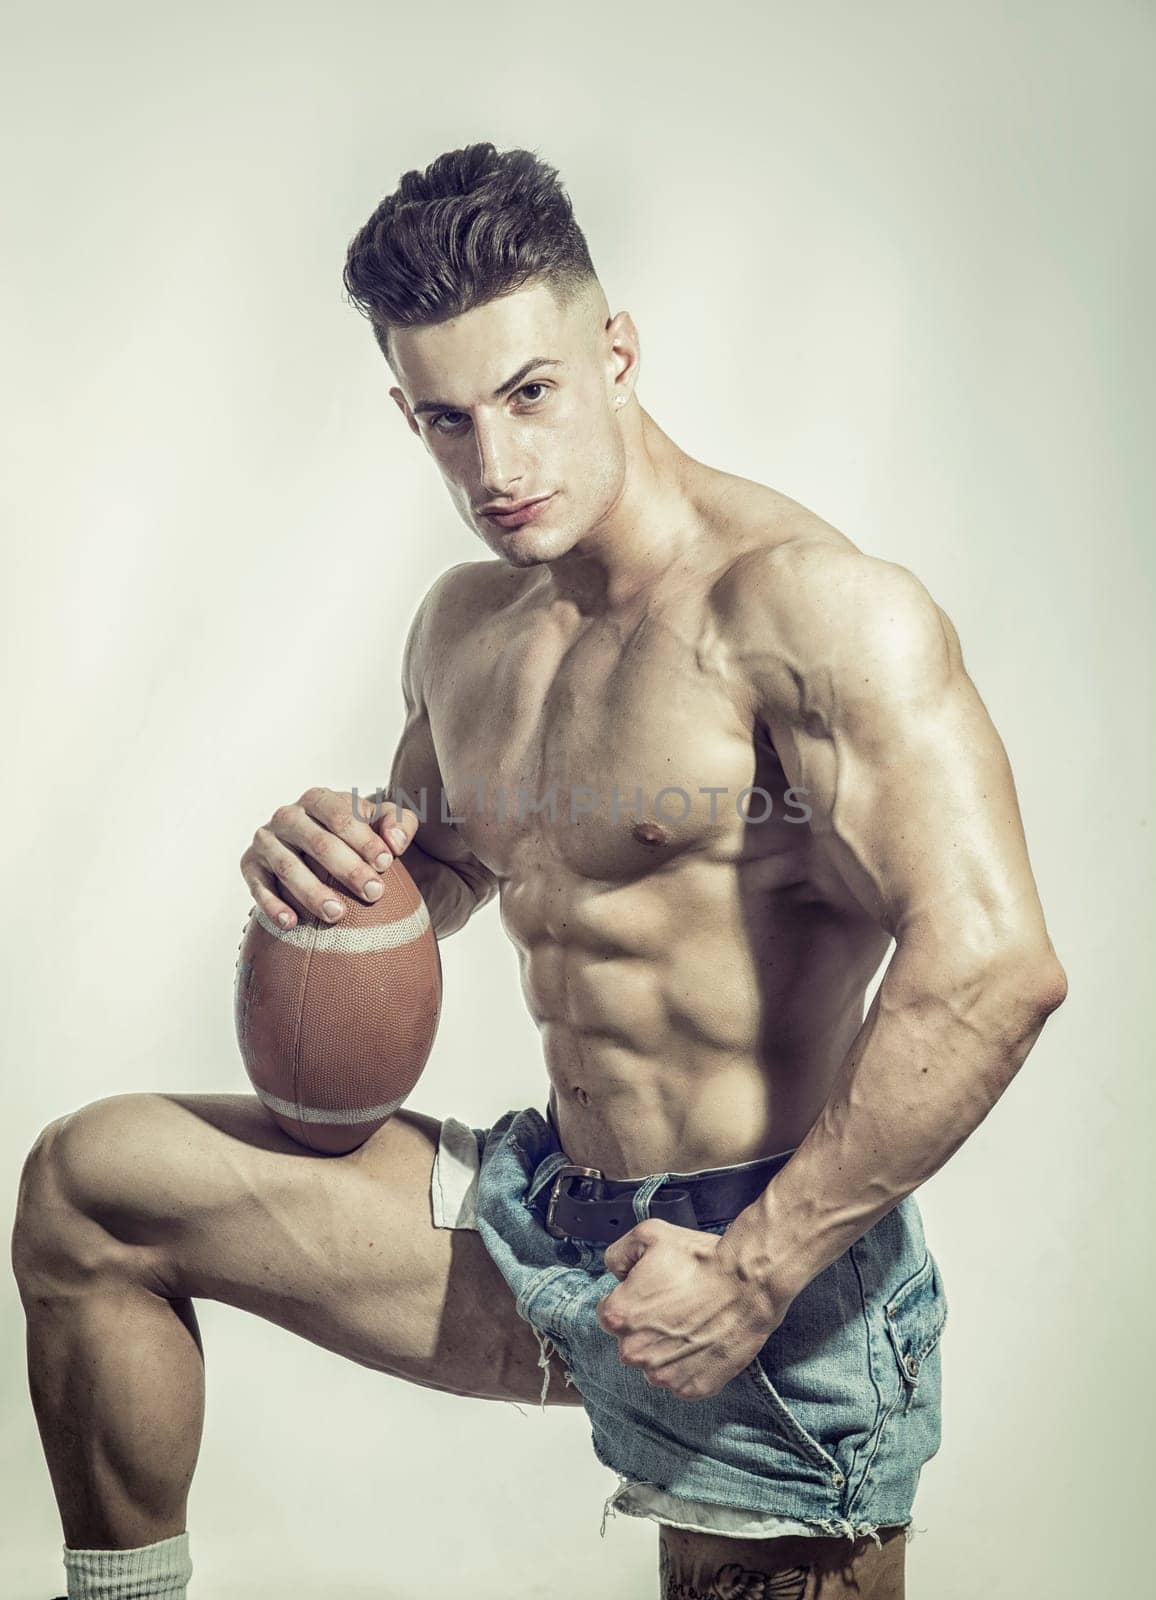 Photo of a muscular man with a football, striking a pose in a professional studio setting by artofphoto